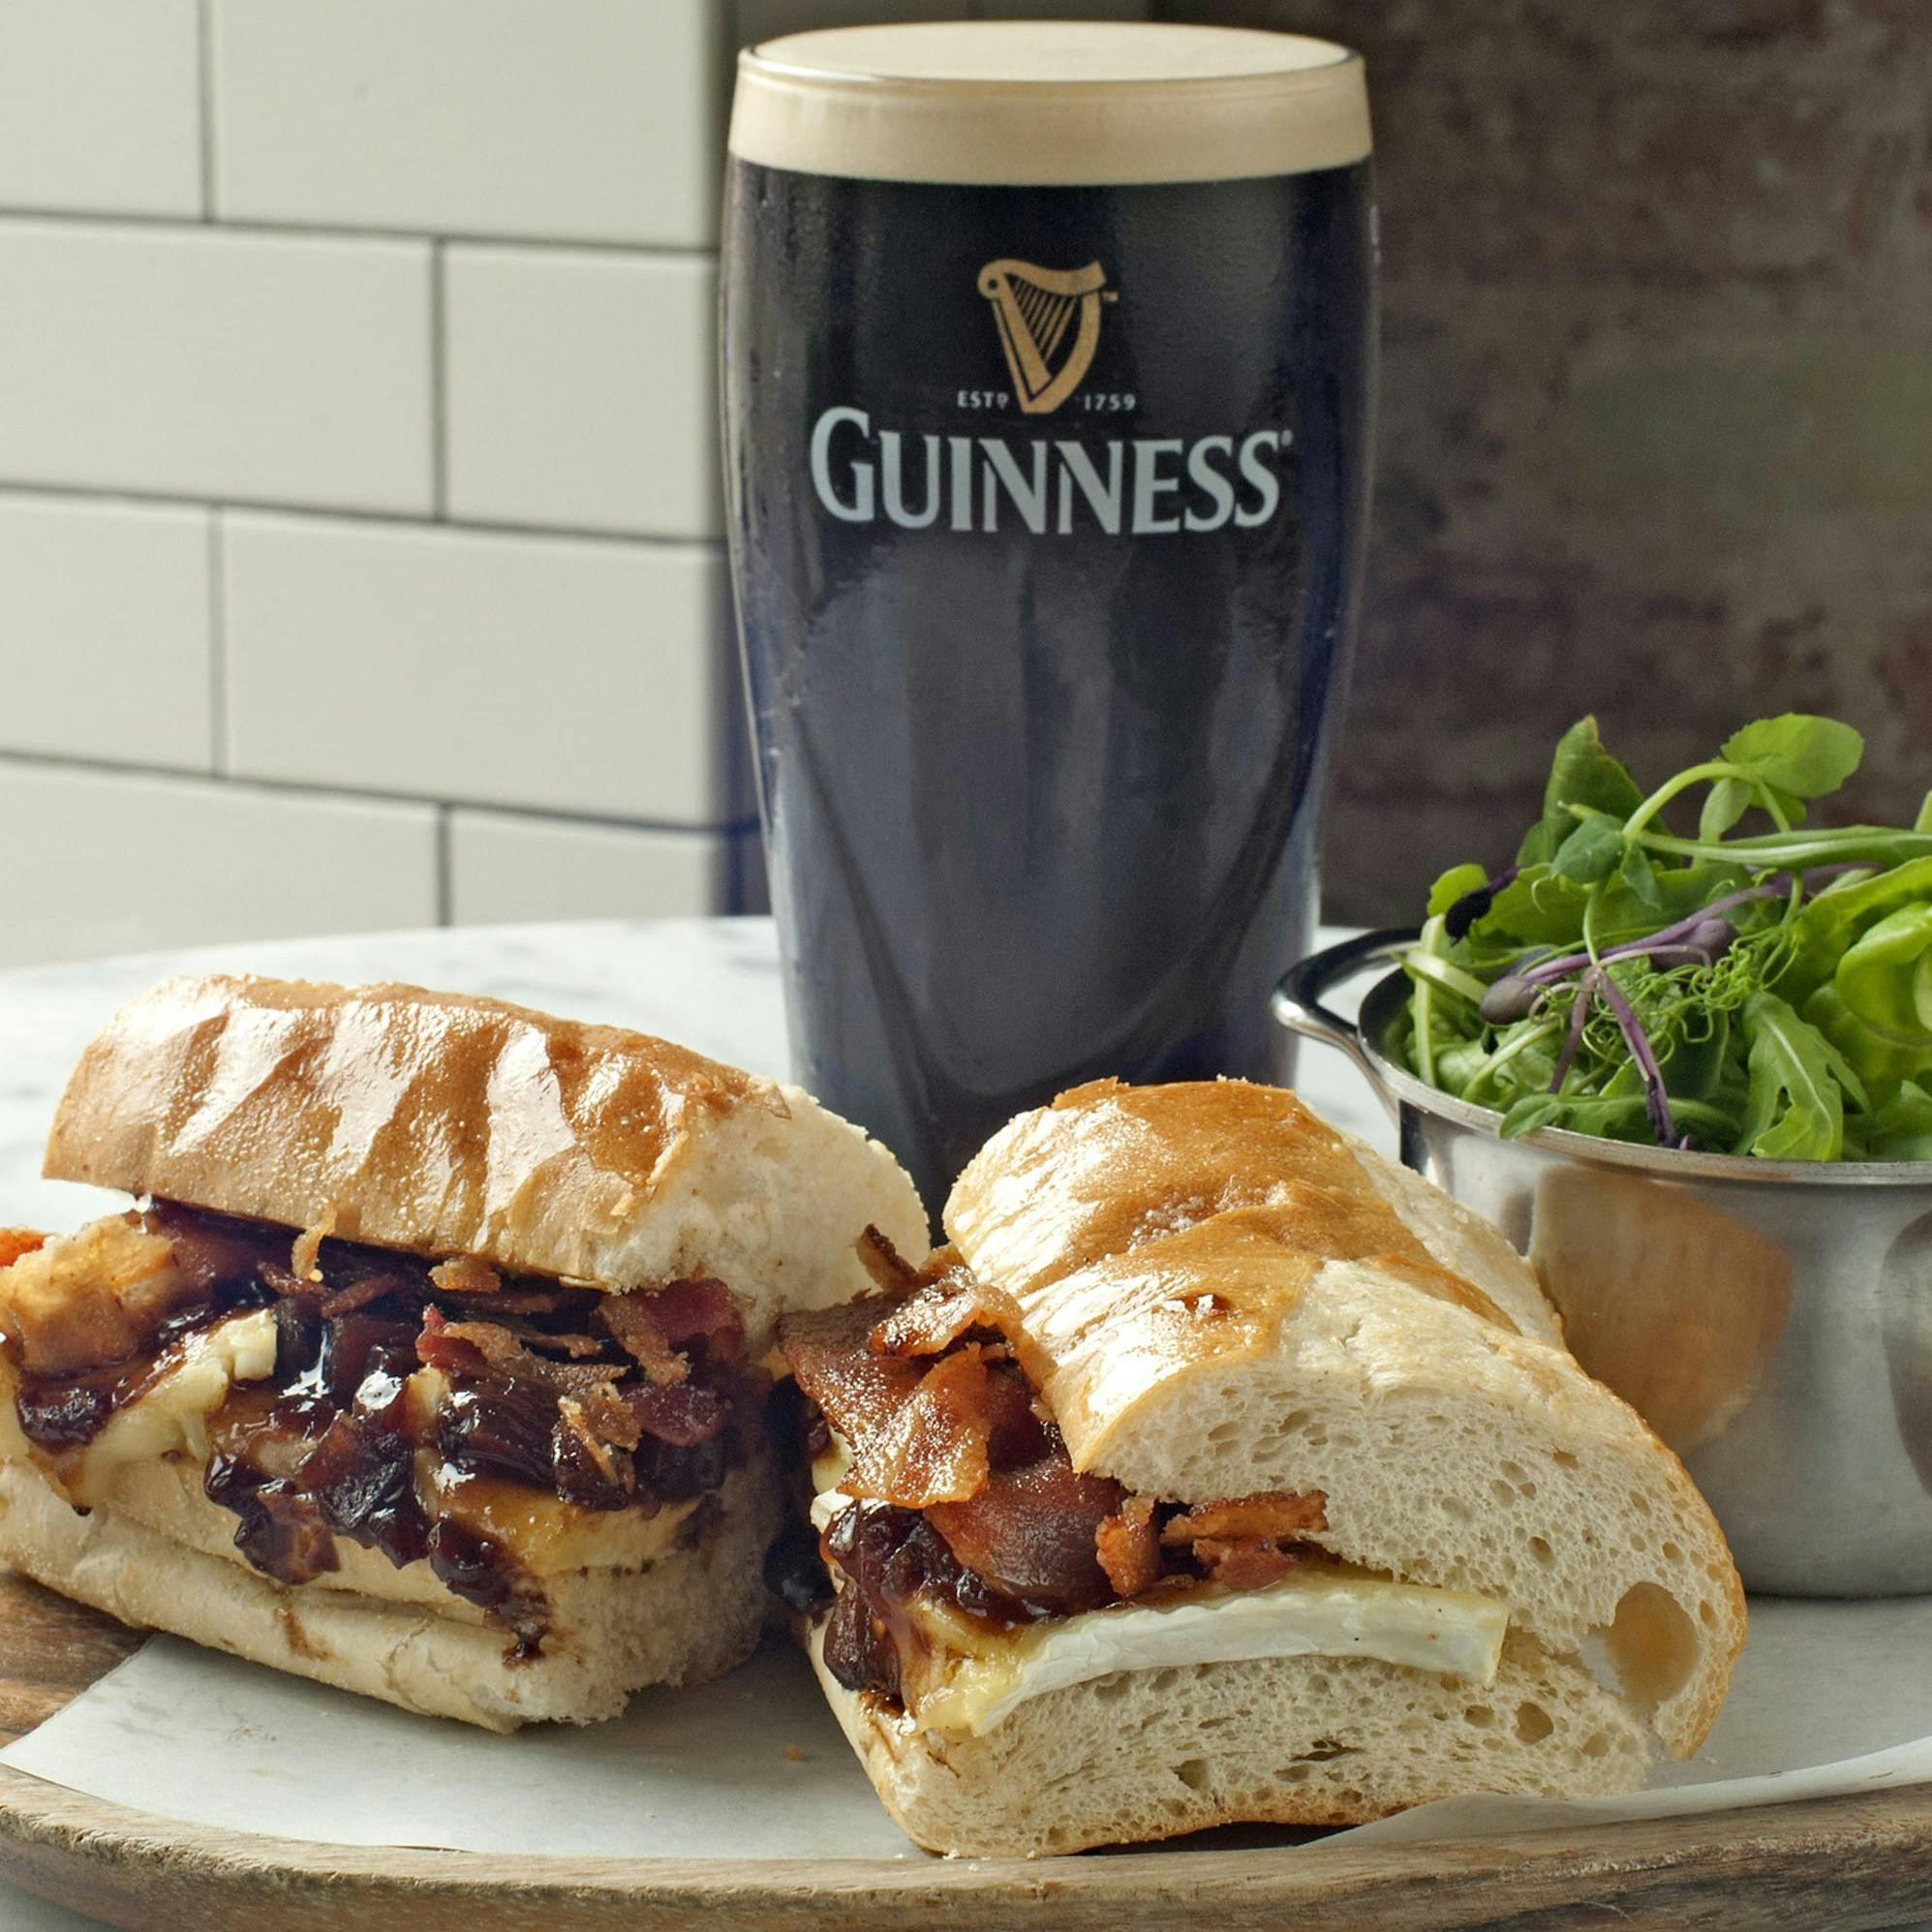 brie sandwich with a pint of Guinness